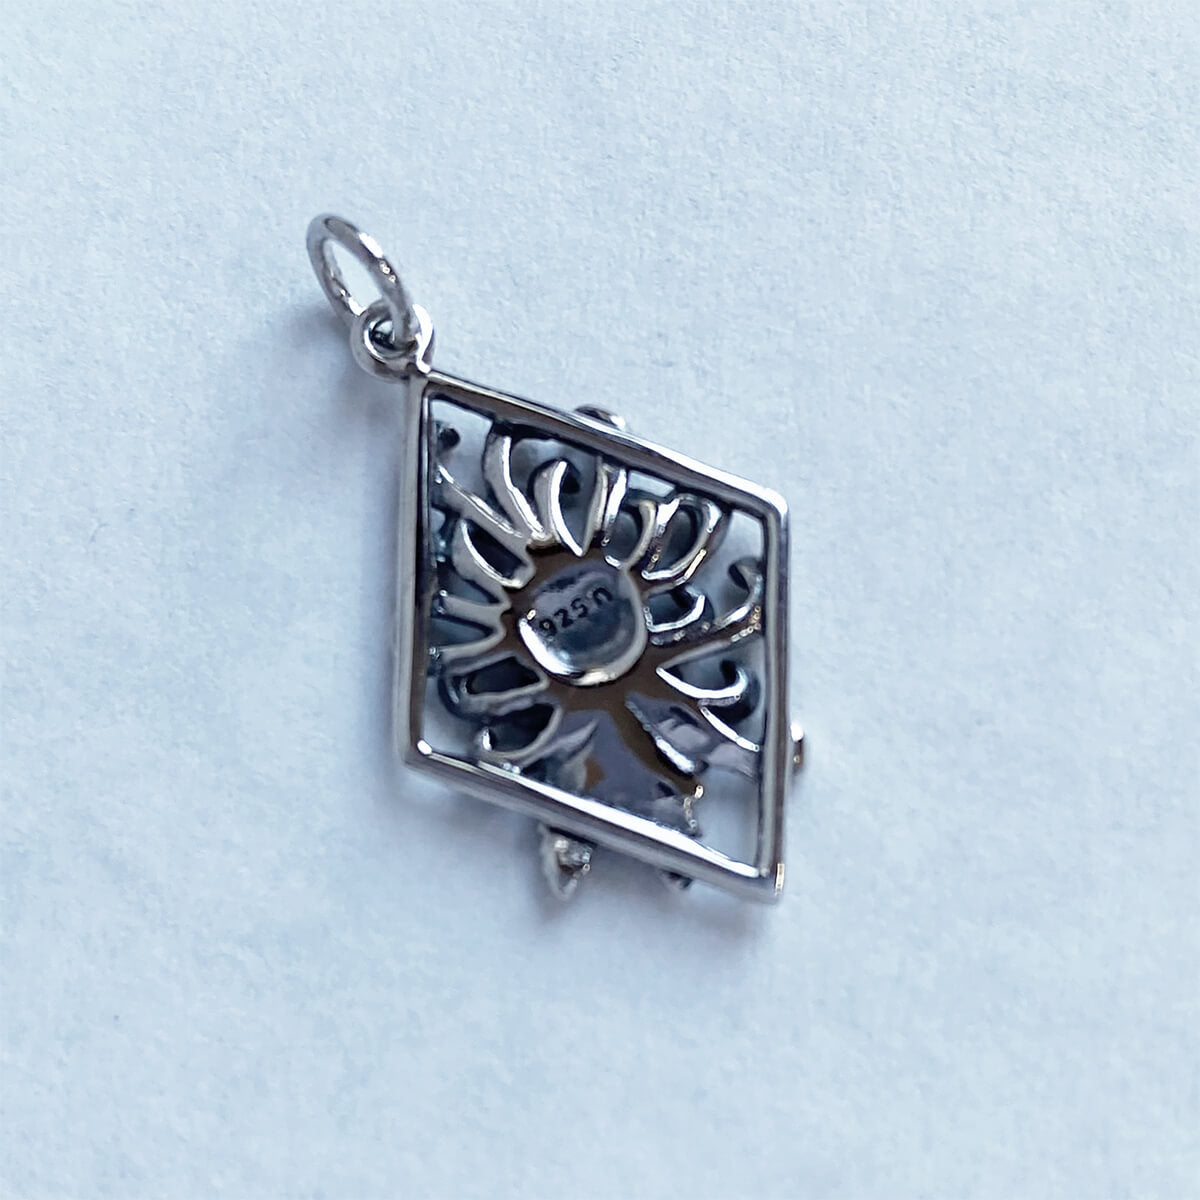 Sterling silver flower charm from Charmarama Charms